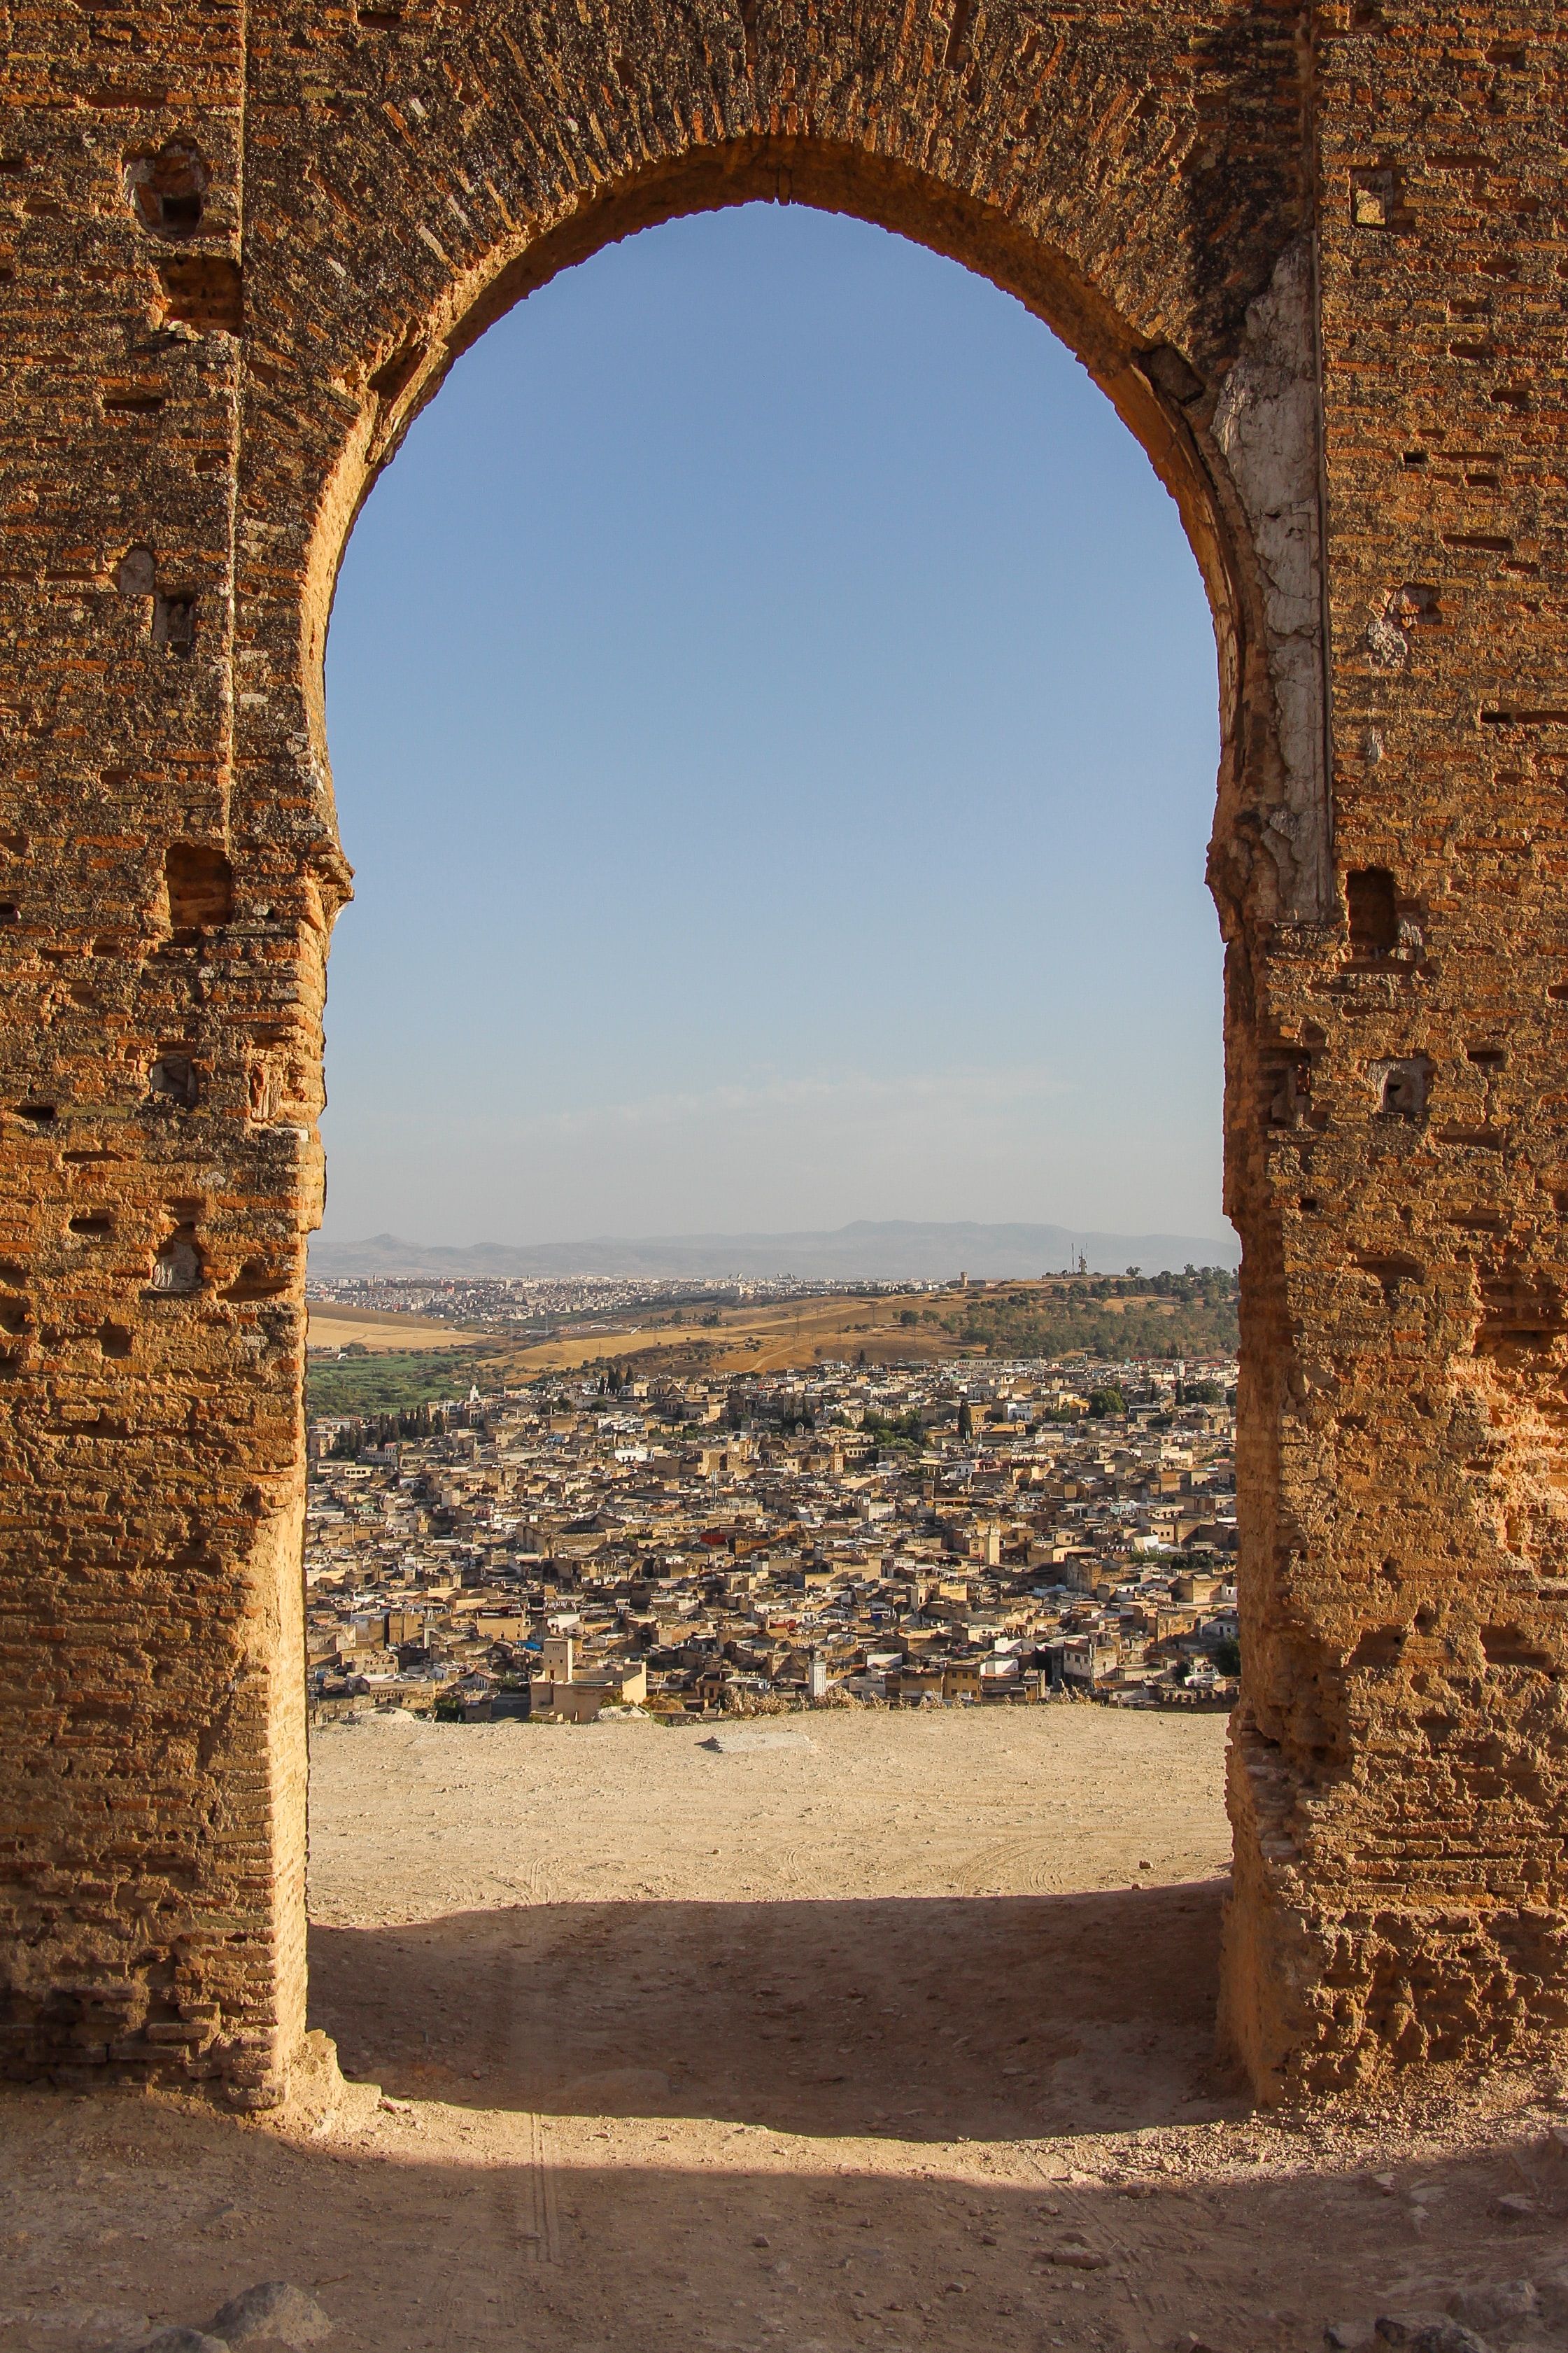 The view of Fez in Morocco